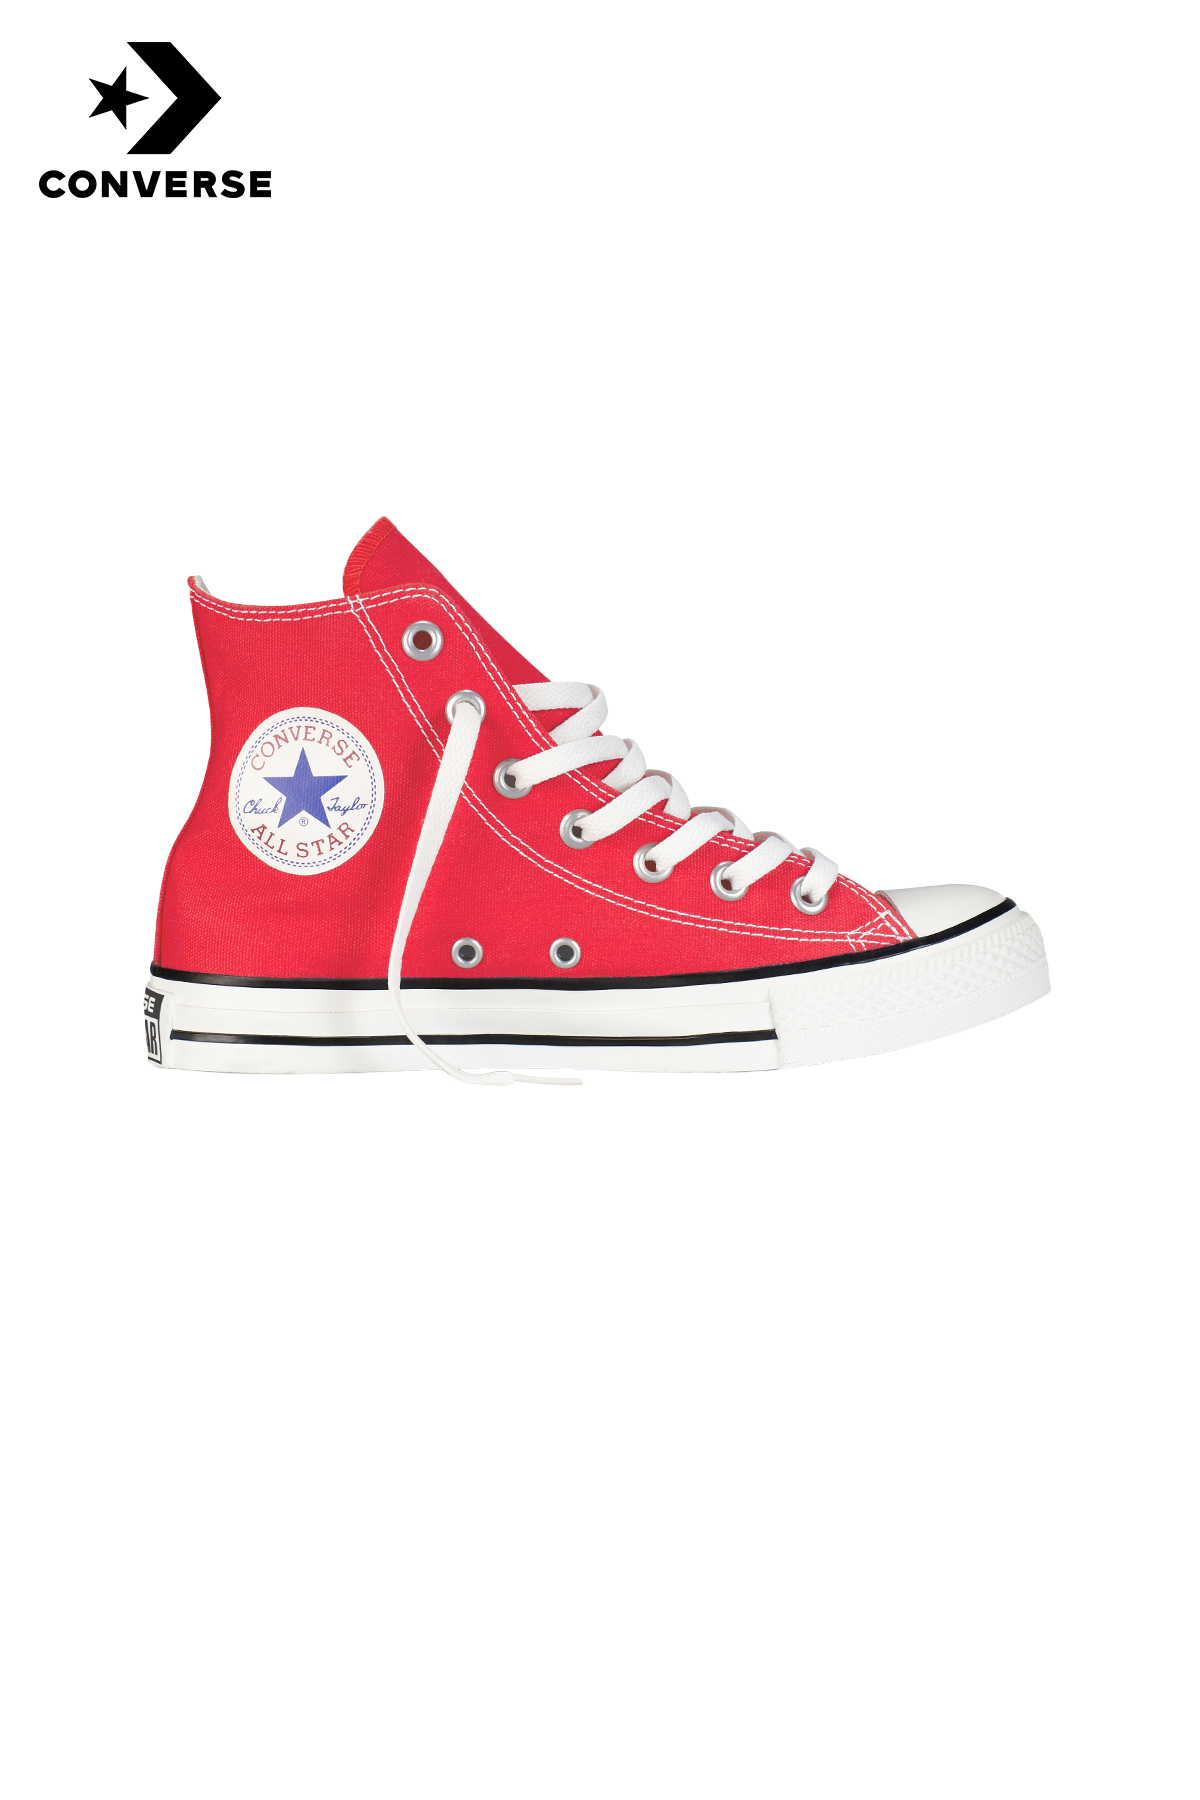 Men Converse All Stars High Red | America Today